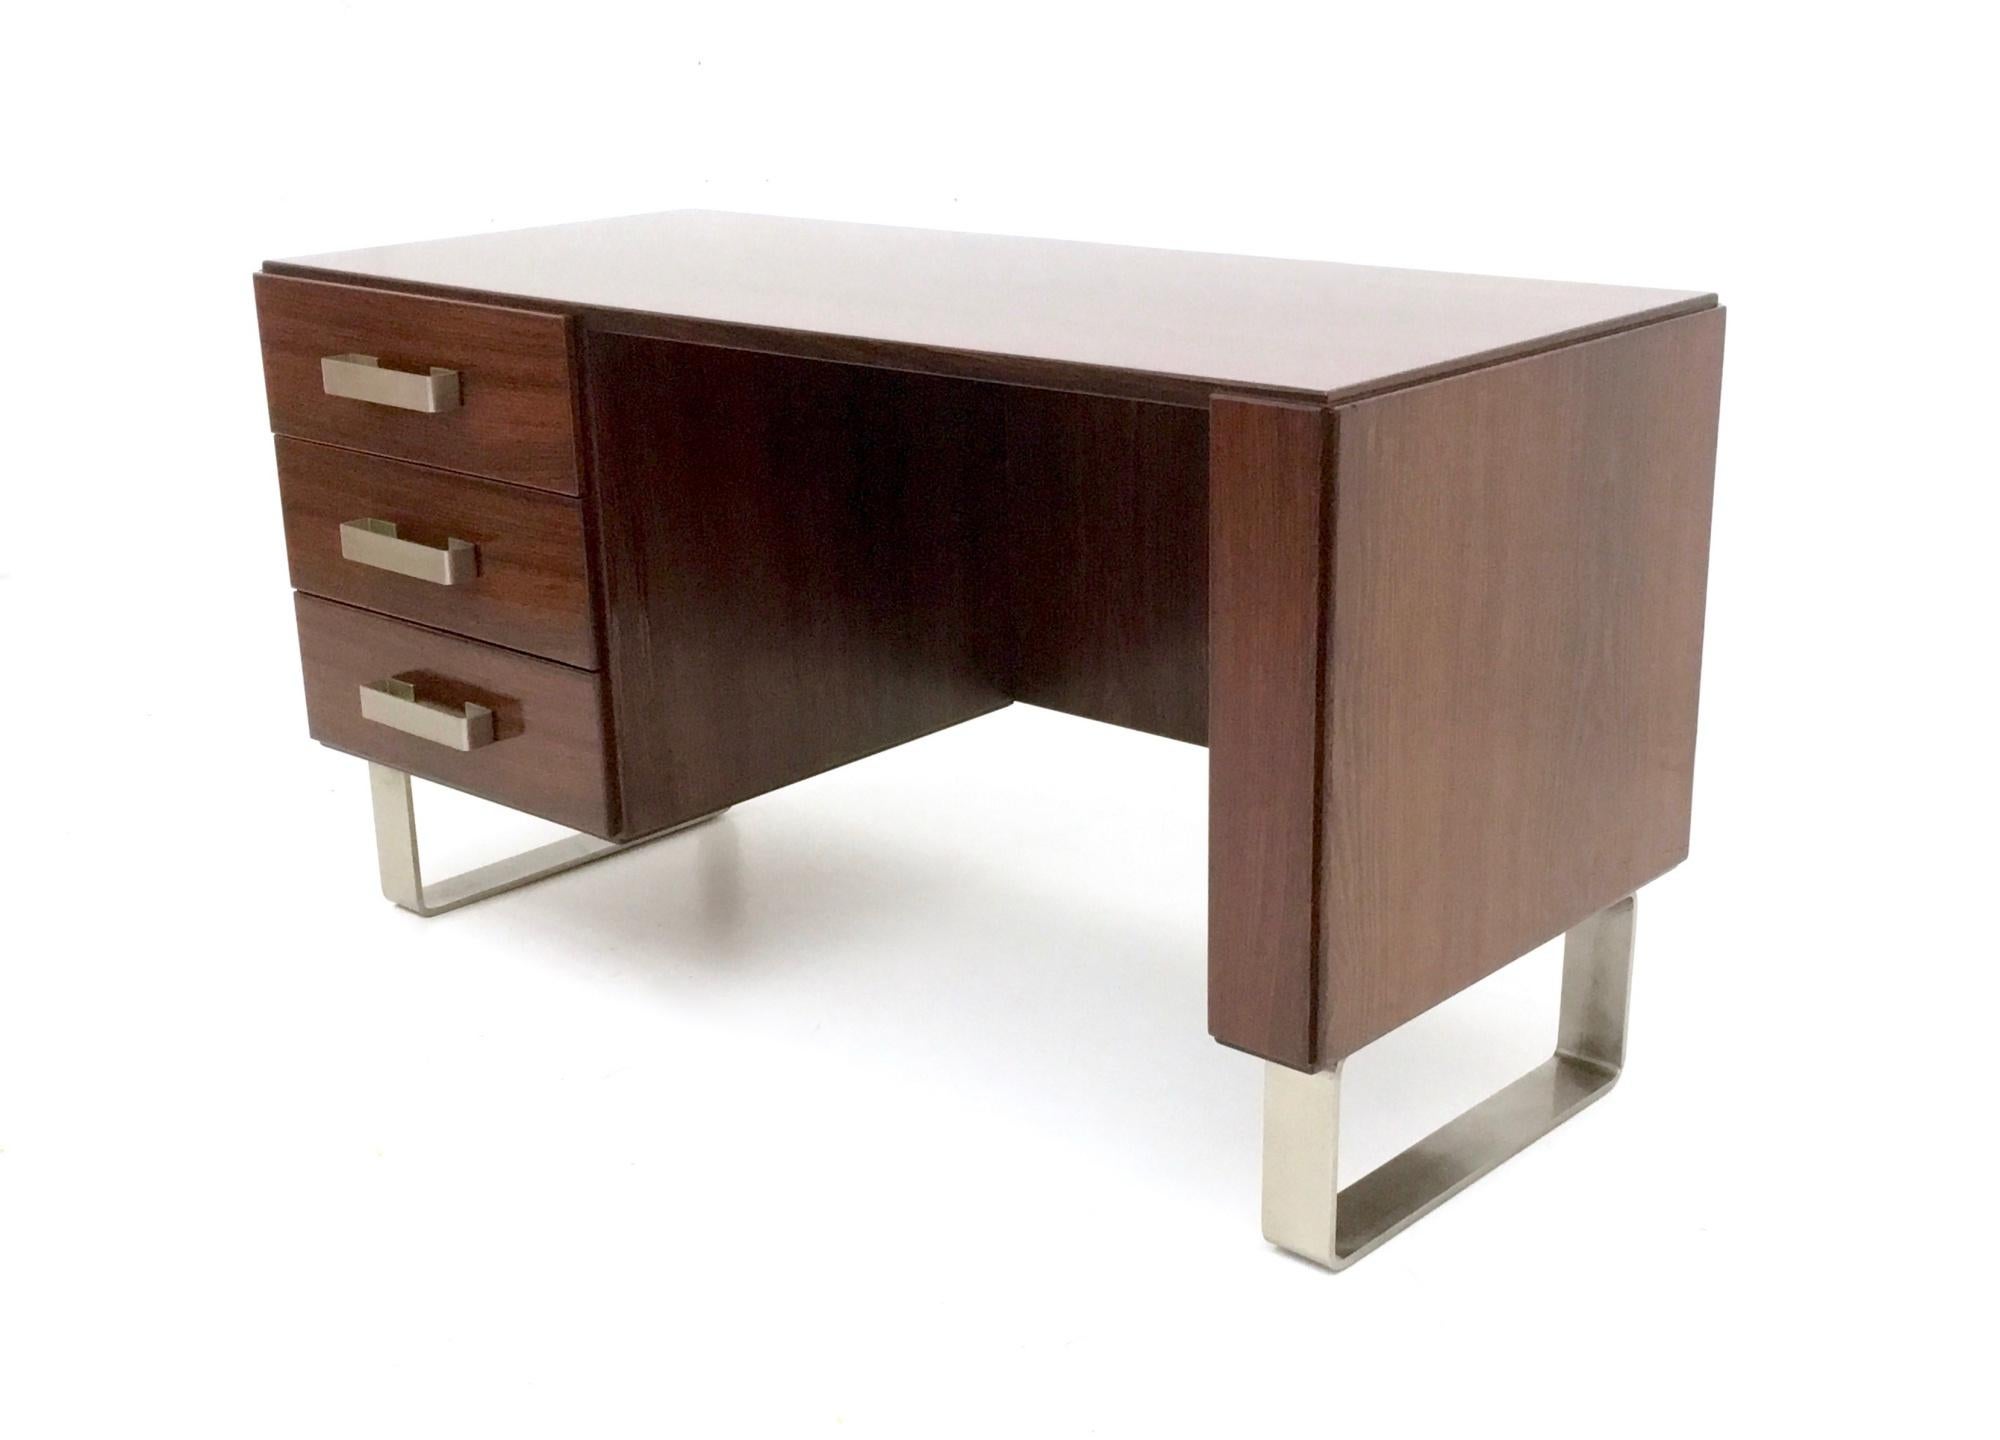 Italian Midcentury Wooden Writing Desk with Nickel-Plated Metal Details, Italy, 1970s